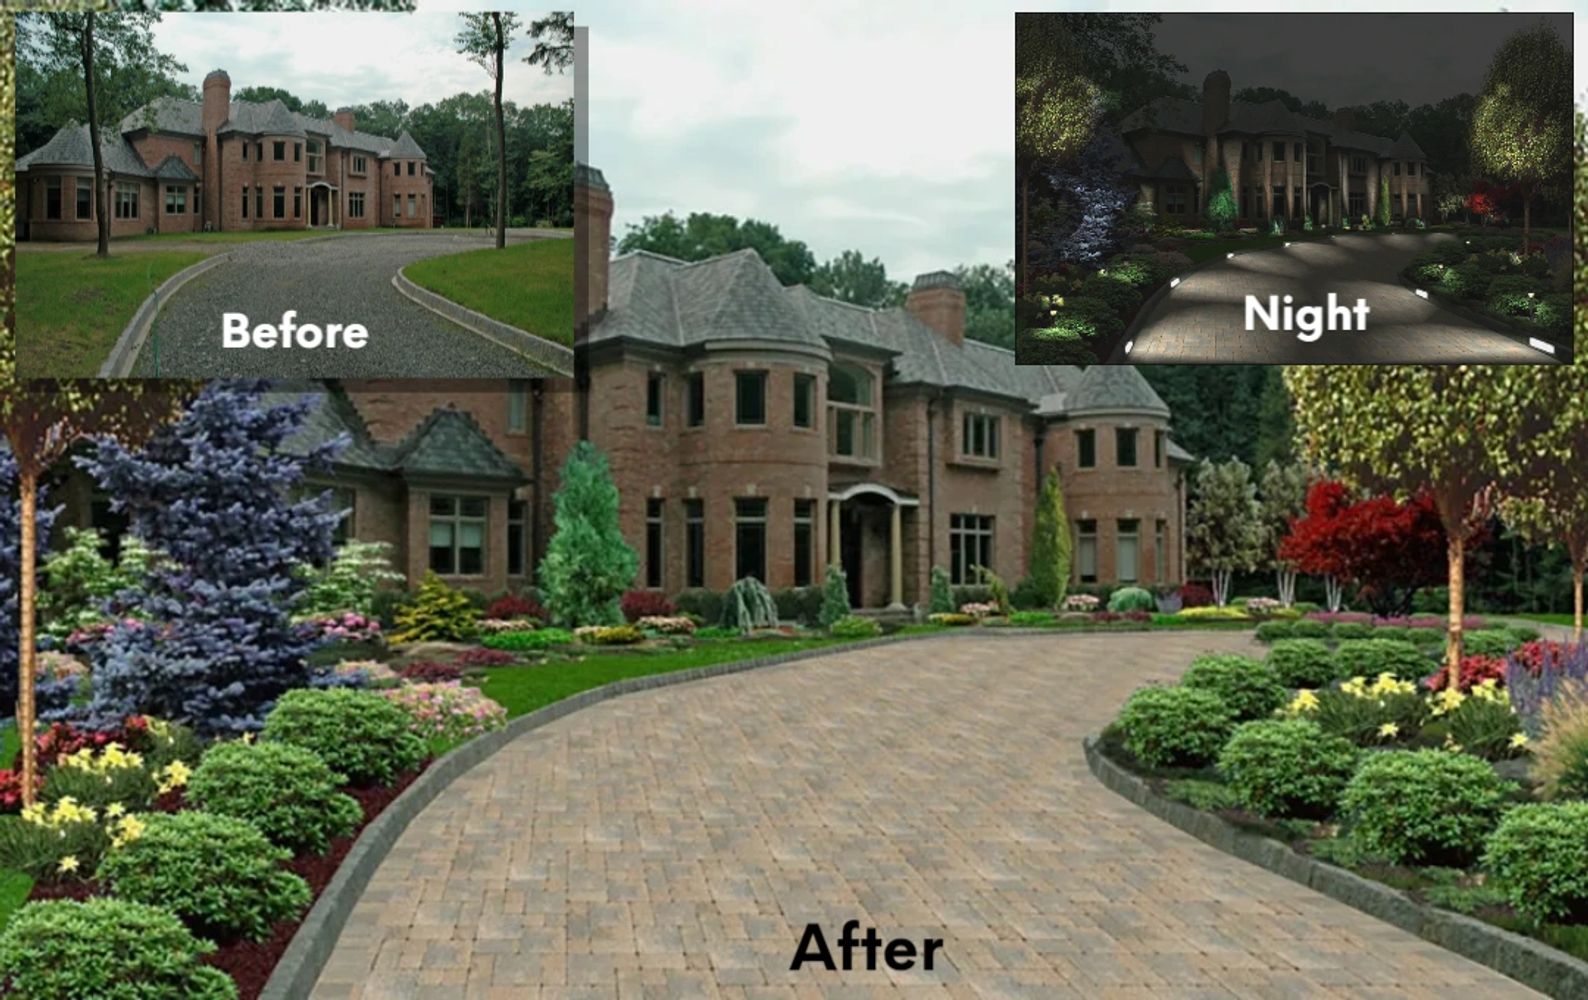 Landscape Design Imaging Software has 4 photo imaging programs to choose from. 